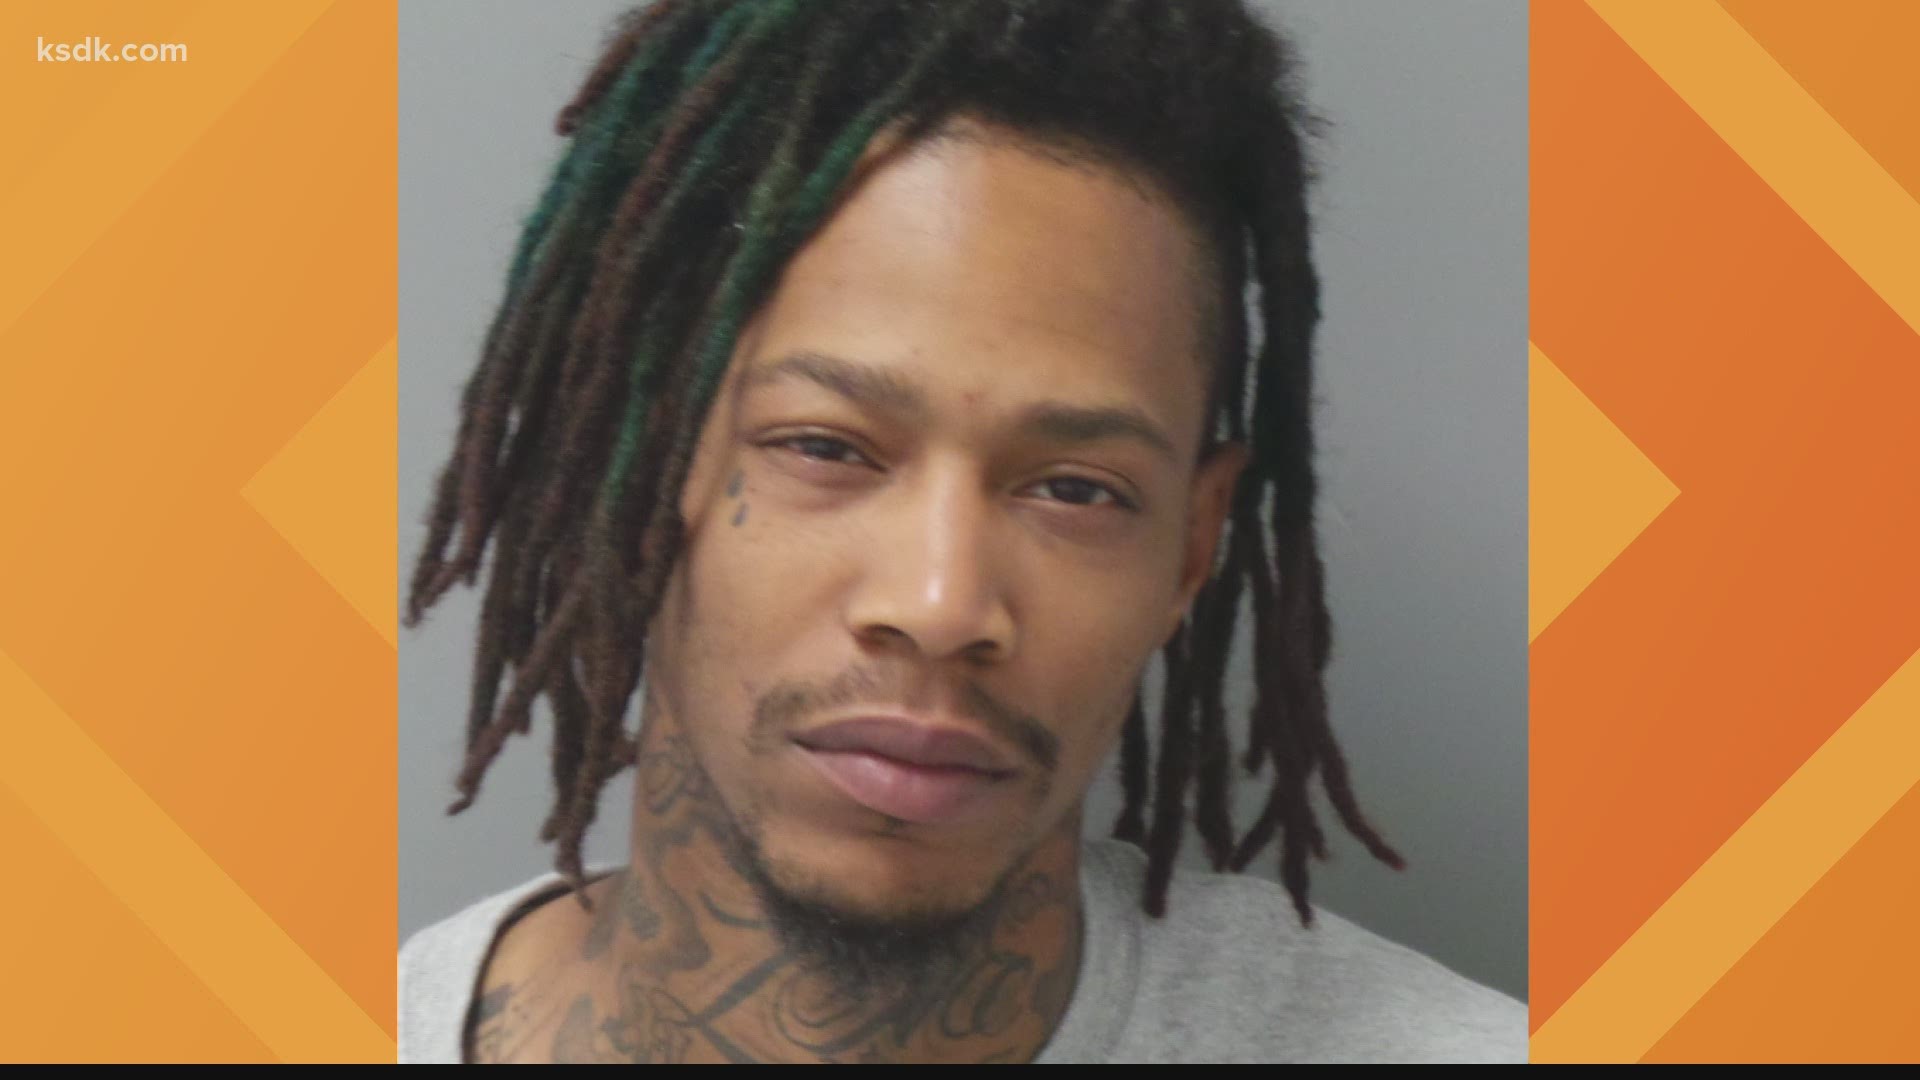 Joc’Quinn Perry, 29, has been charged with first-degree assault, armed criminal action and unlawful possession of a firearm in connection with the Aug. 31 incident.